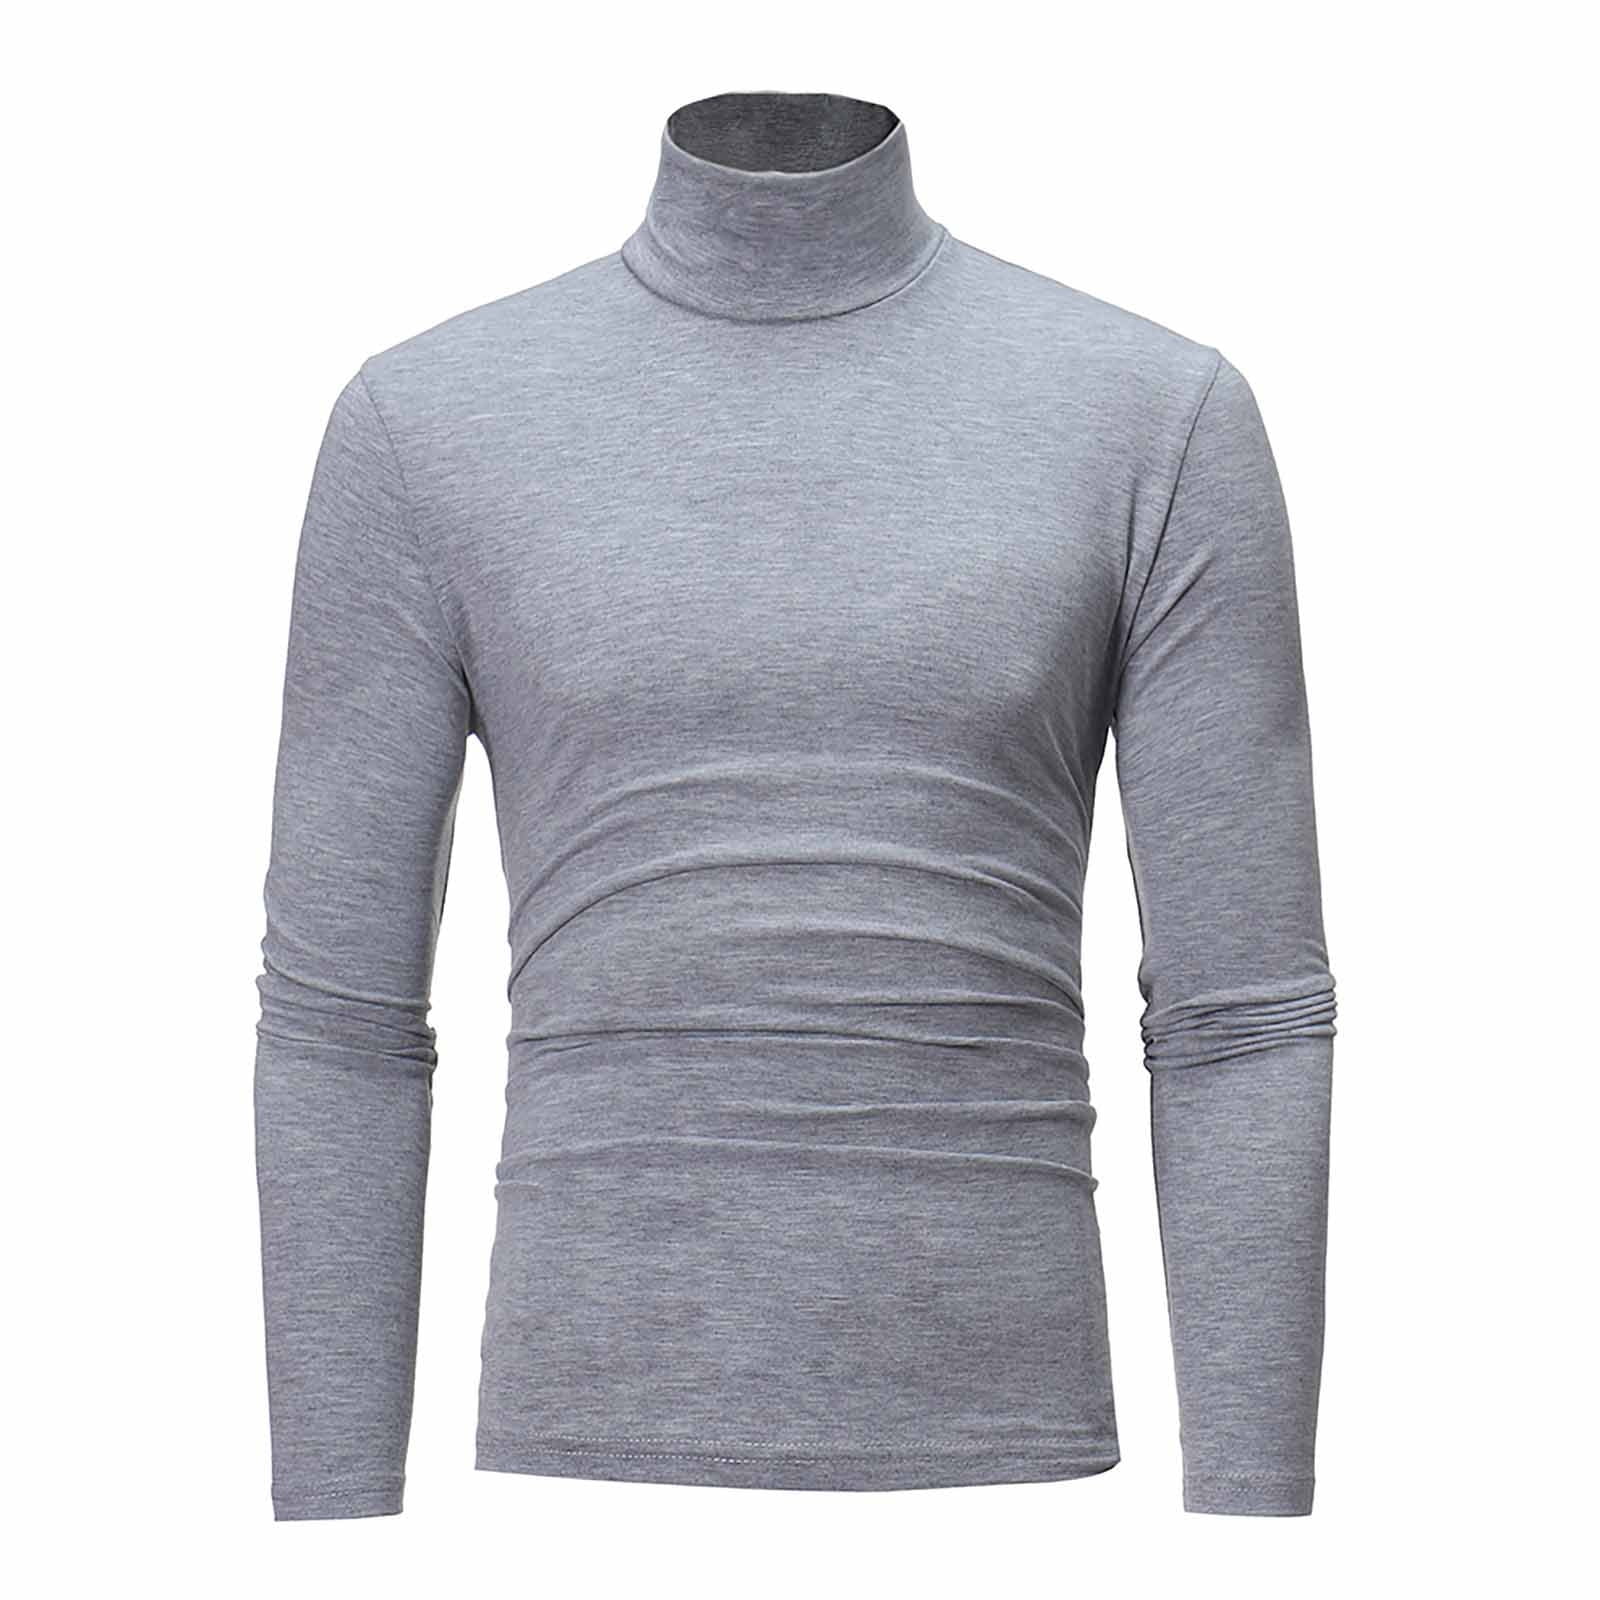 Susanny Big and Tall Turtleneck Sweaters for Men Mock Neck Long Sleeve ...